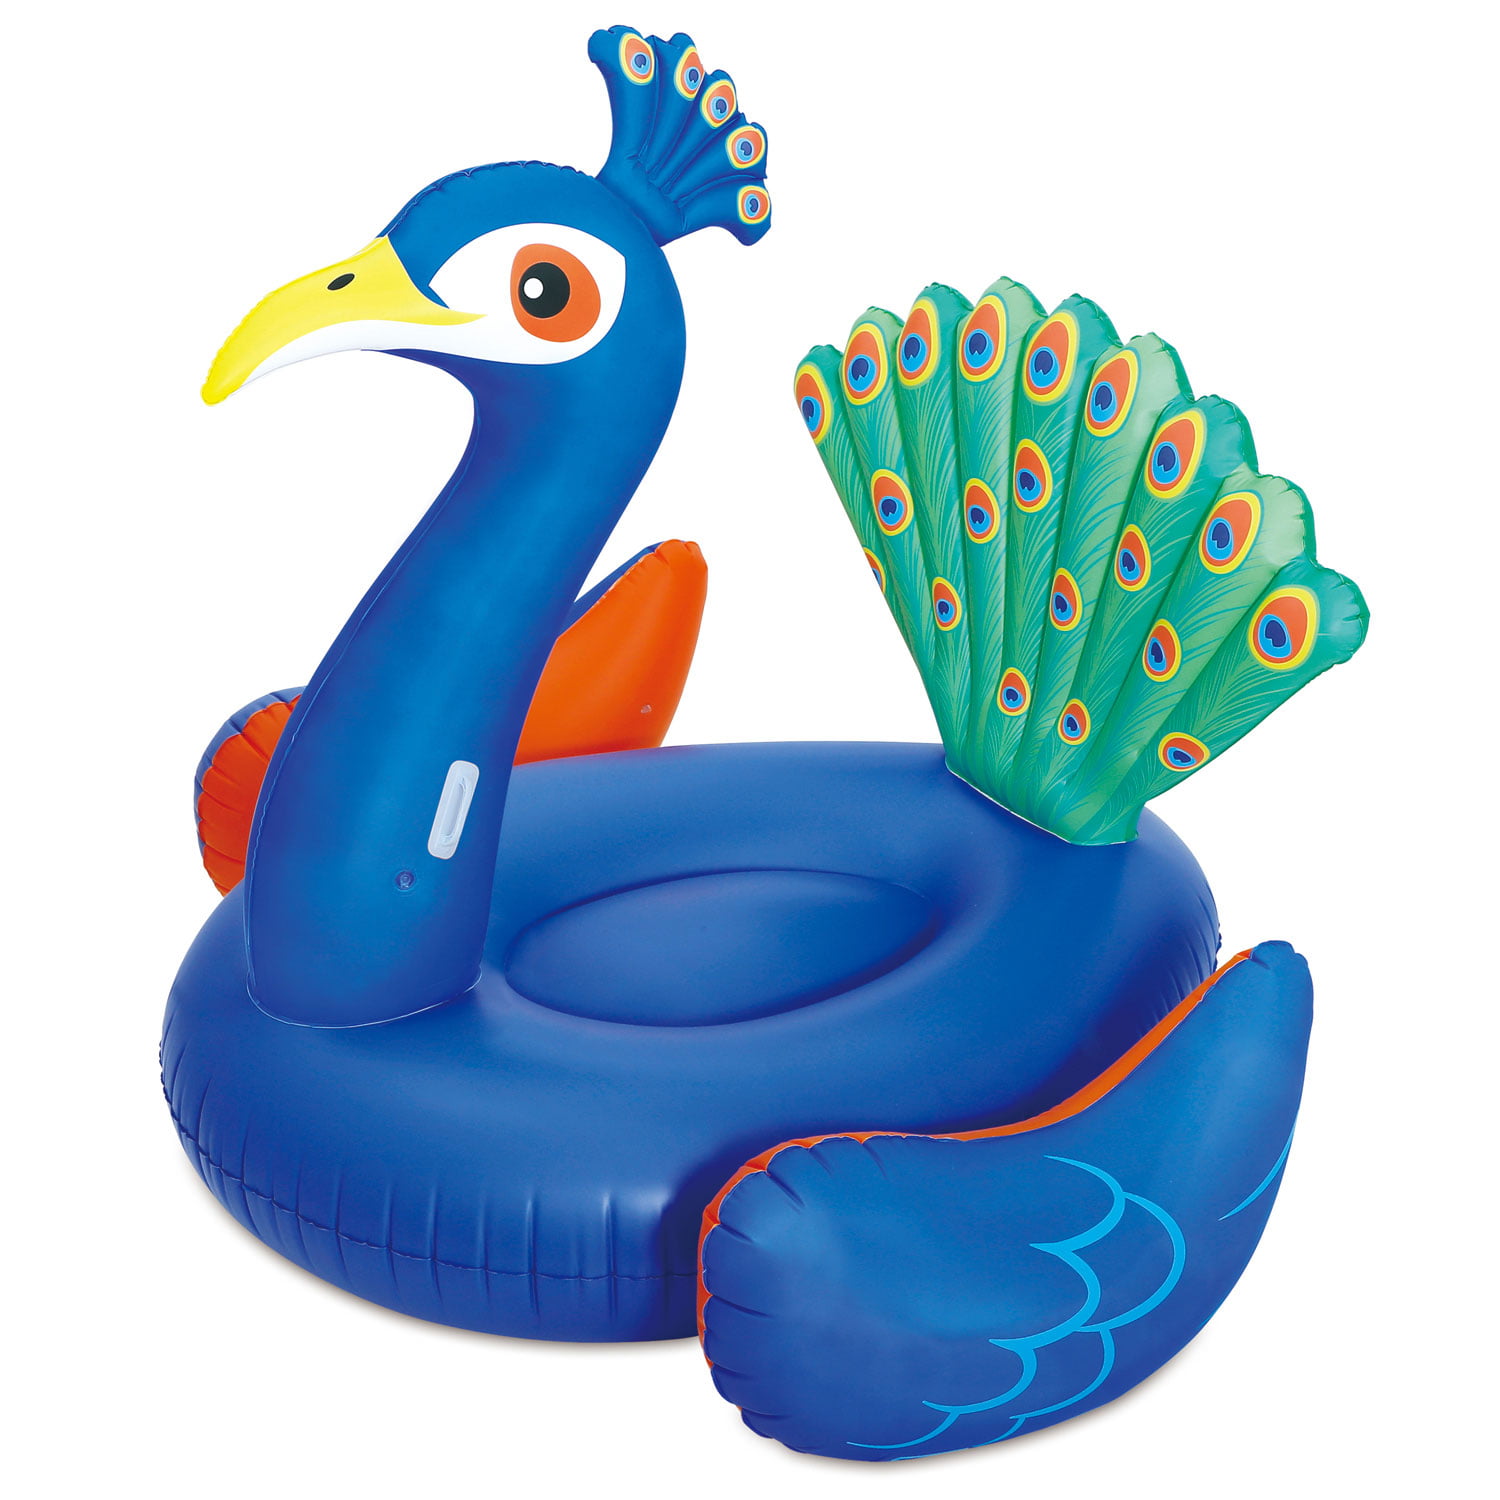 Giant Inflatable Pool Float Beach Swimming Lounger Peacock Shaped Swimming Toy 